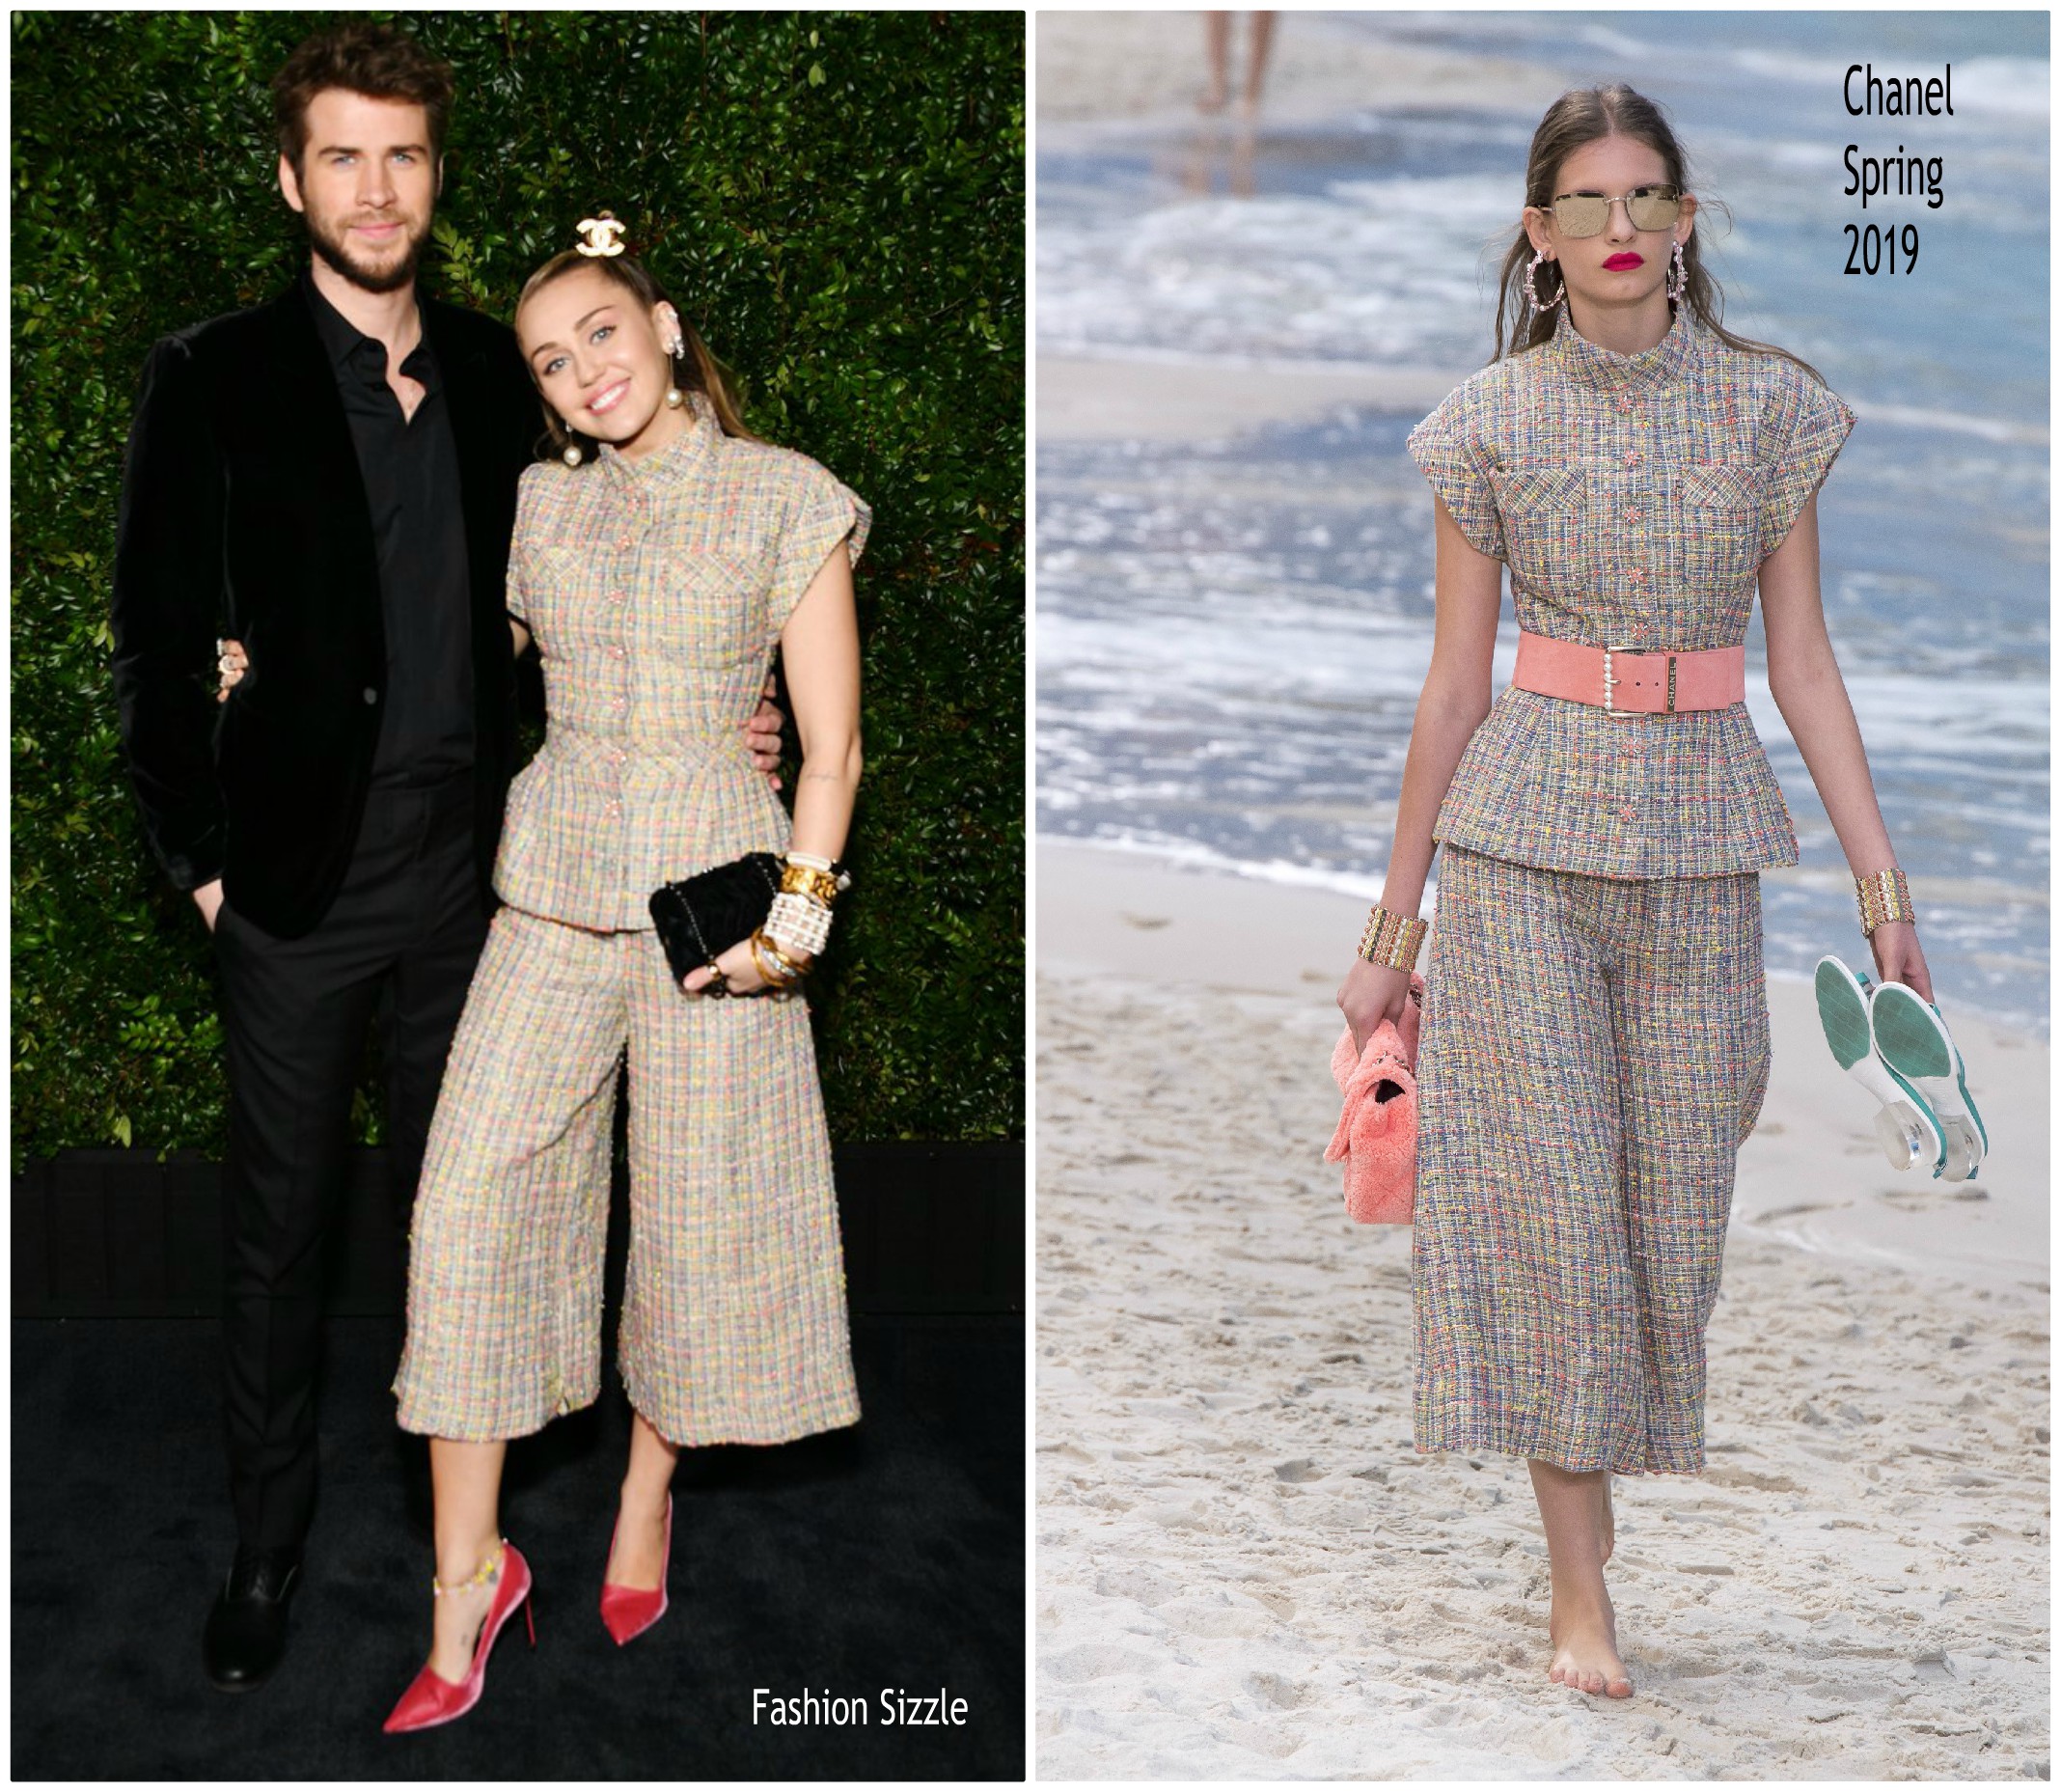 miley-cyrus-in-chanel-2019-chanel-and-charles-finch-pre-oscar-awards-dinner